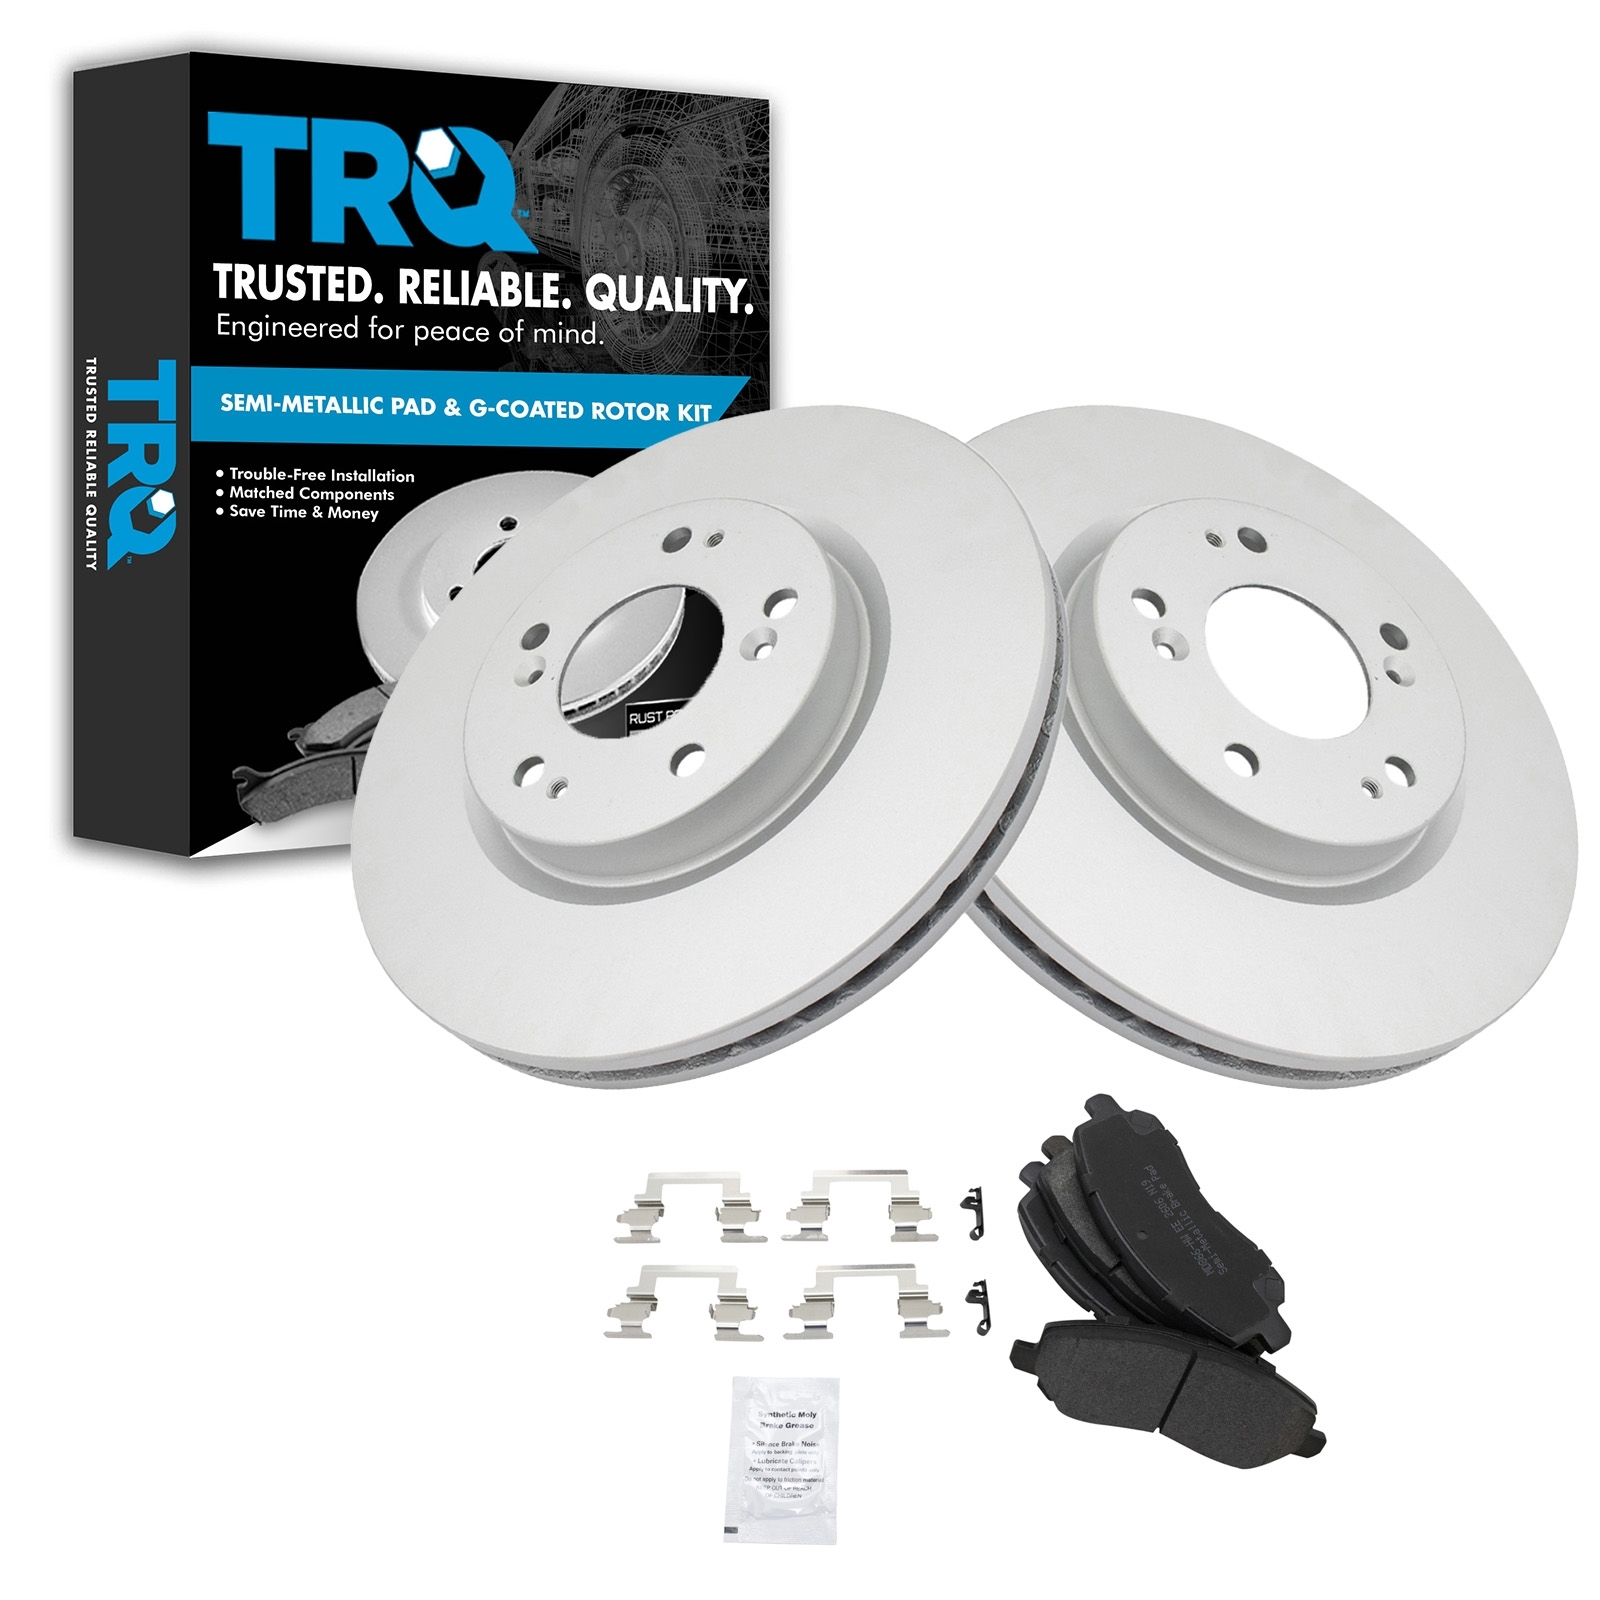 Trq Semi-Metallic Brake Pad & Rotor Kit (G-Coated) For 07-17 Compass 07-17 Patriot Front,